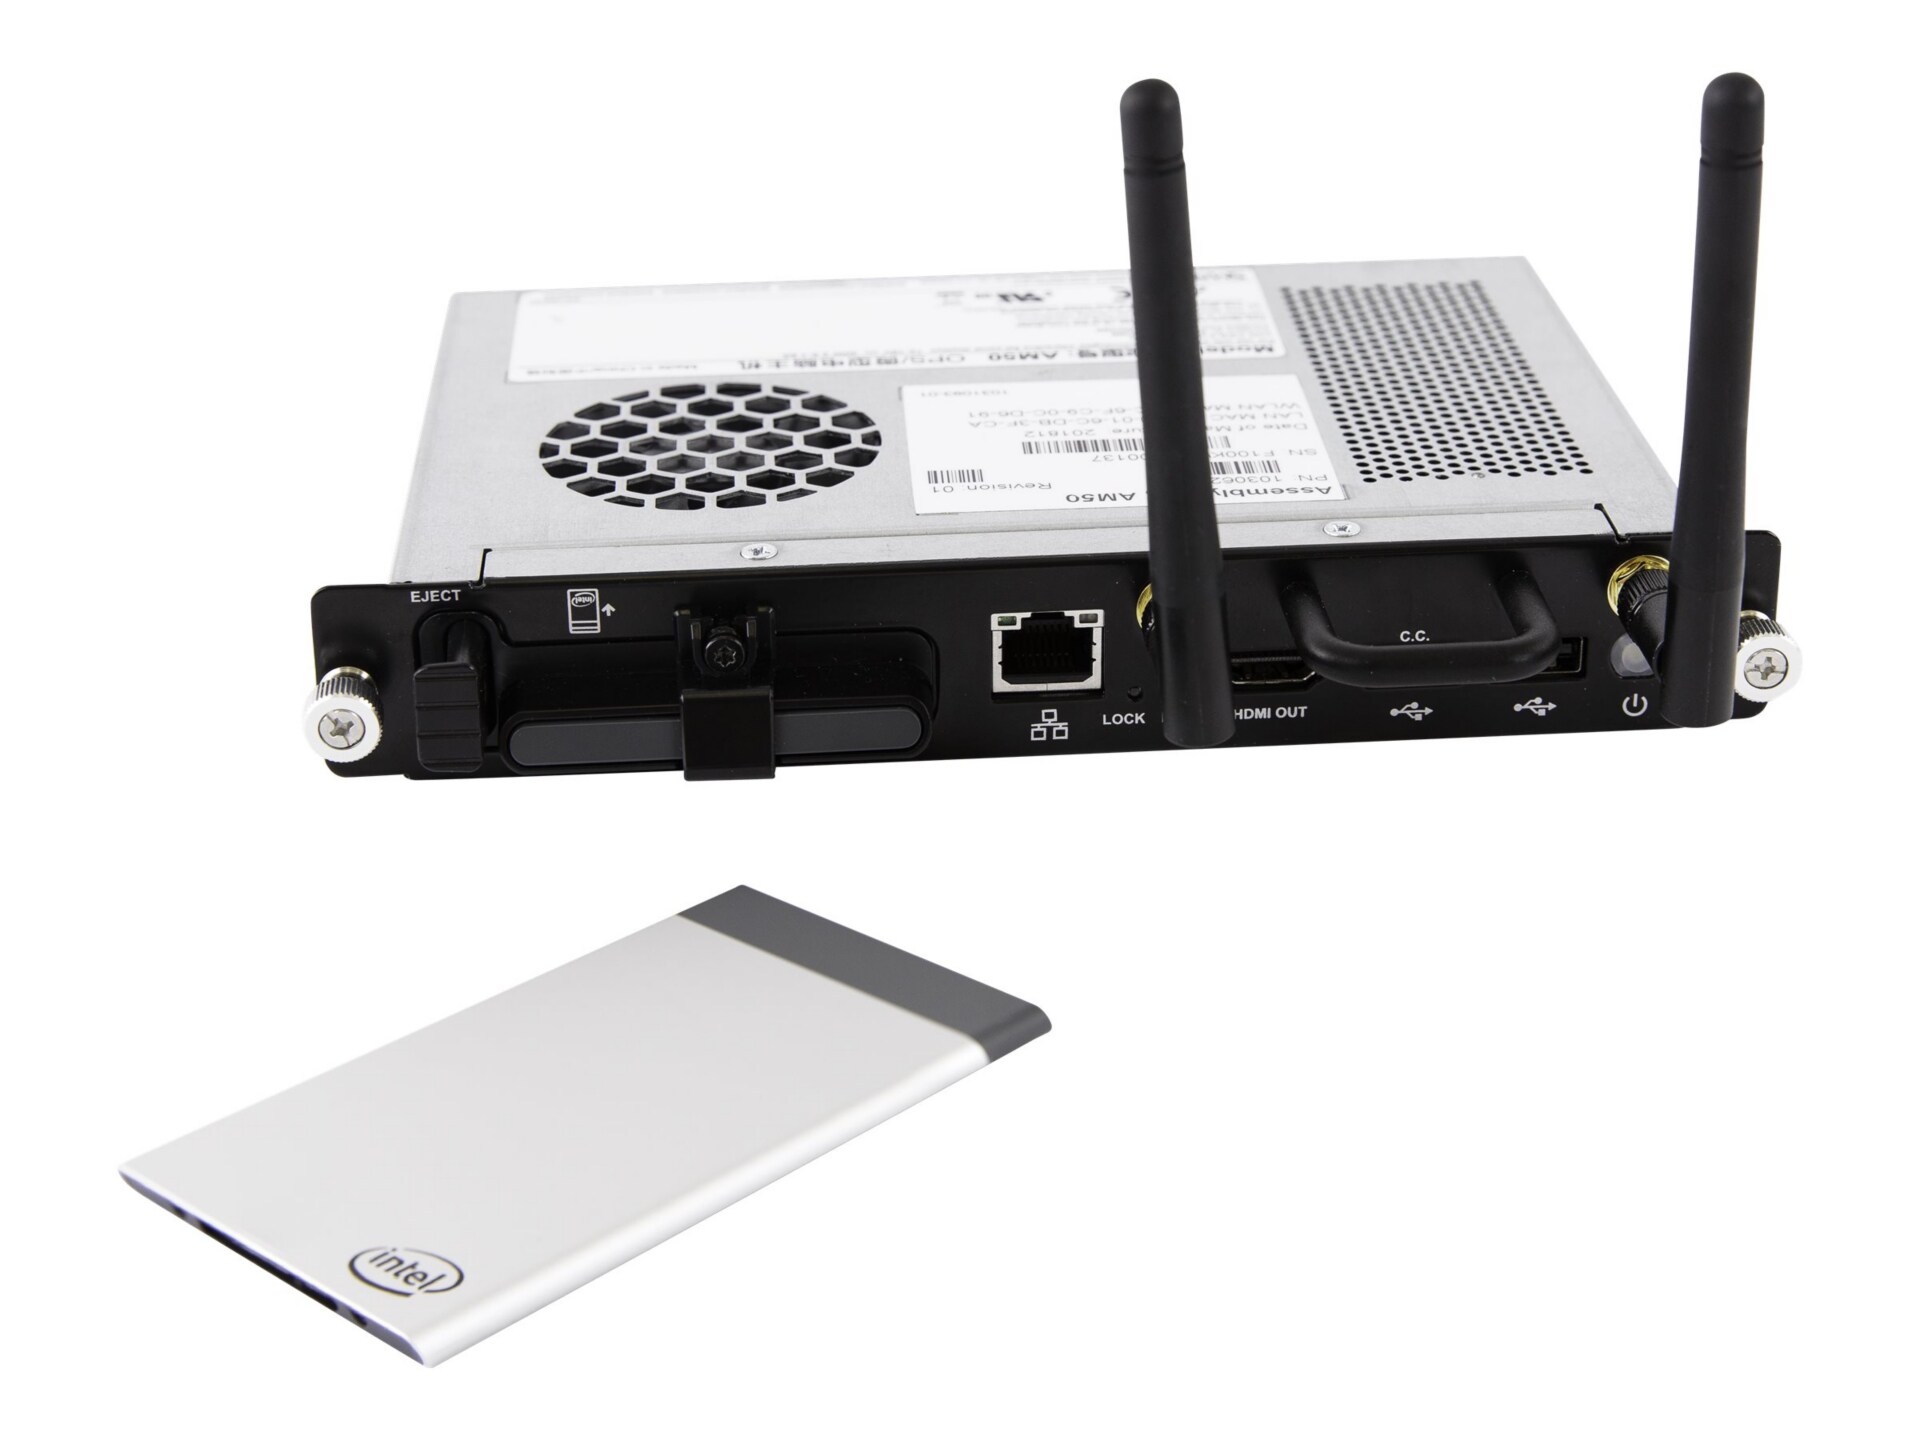 SMART iQ appliance AM40 for education - digital signage player